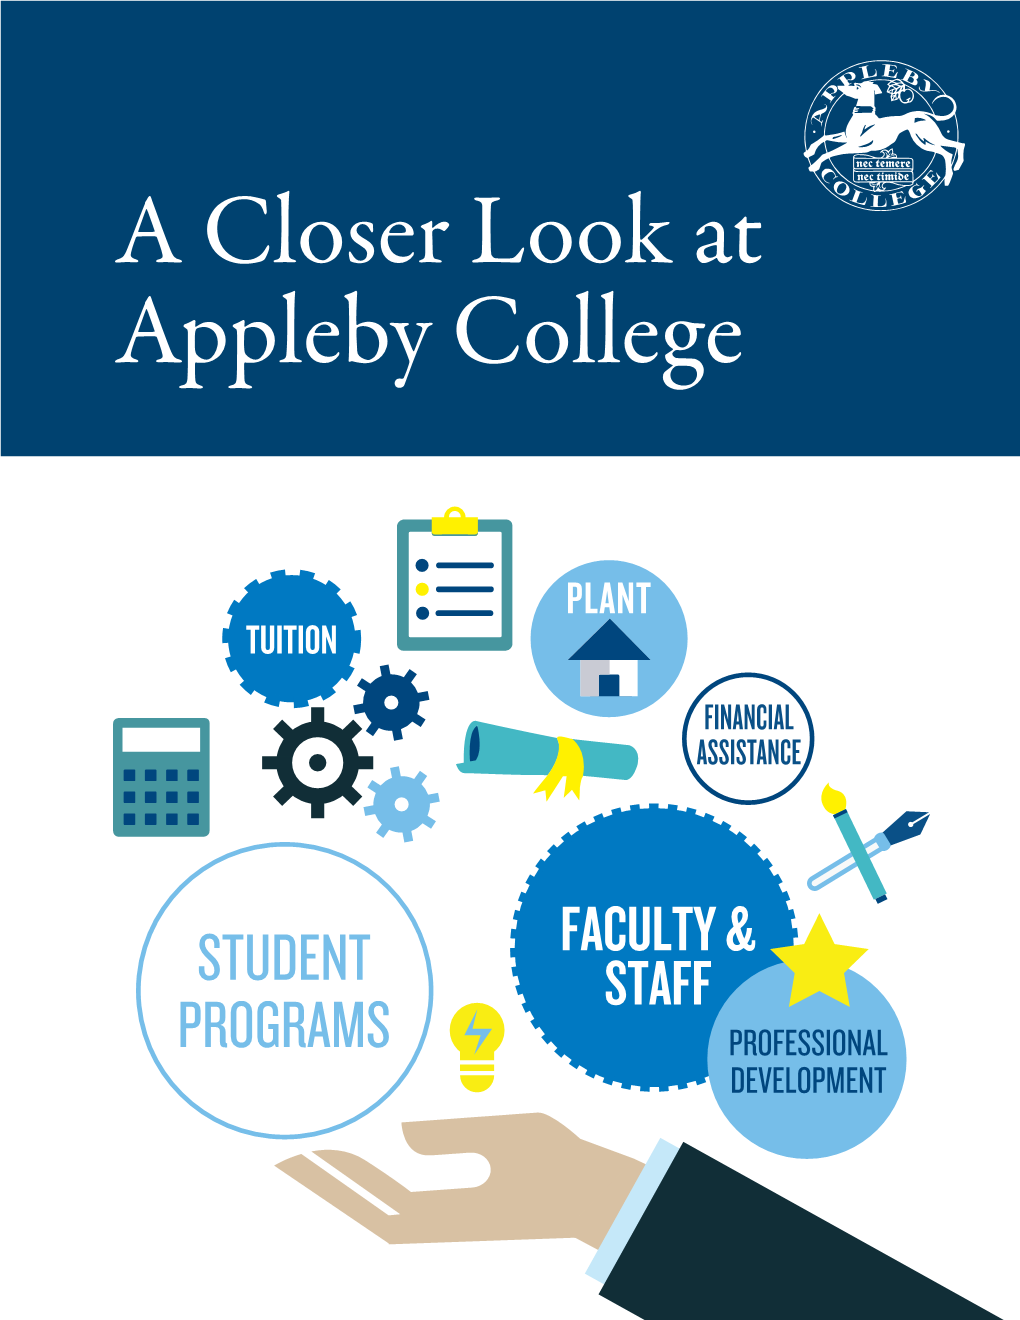 A Closer Look at Appleby College